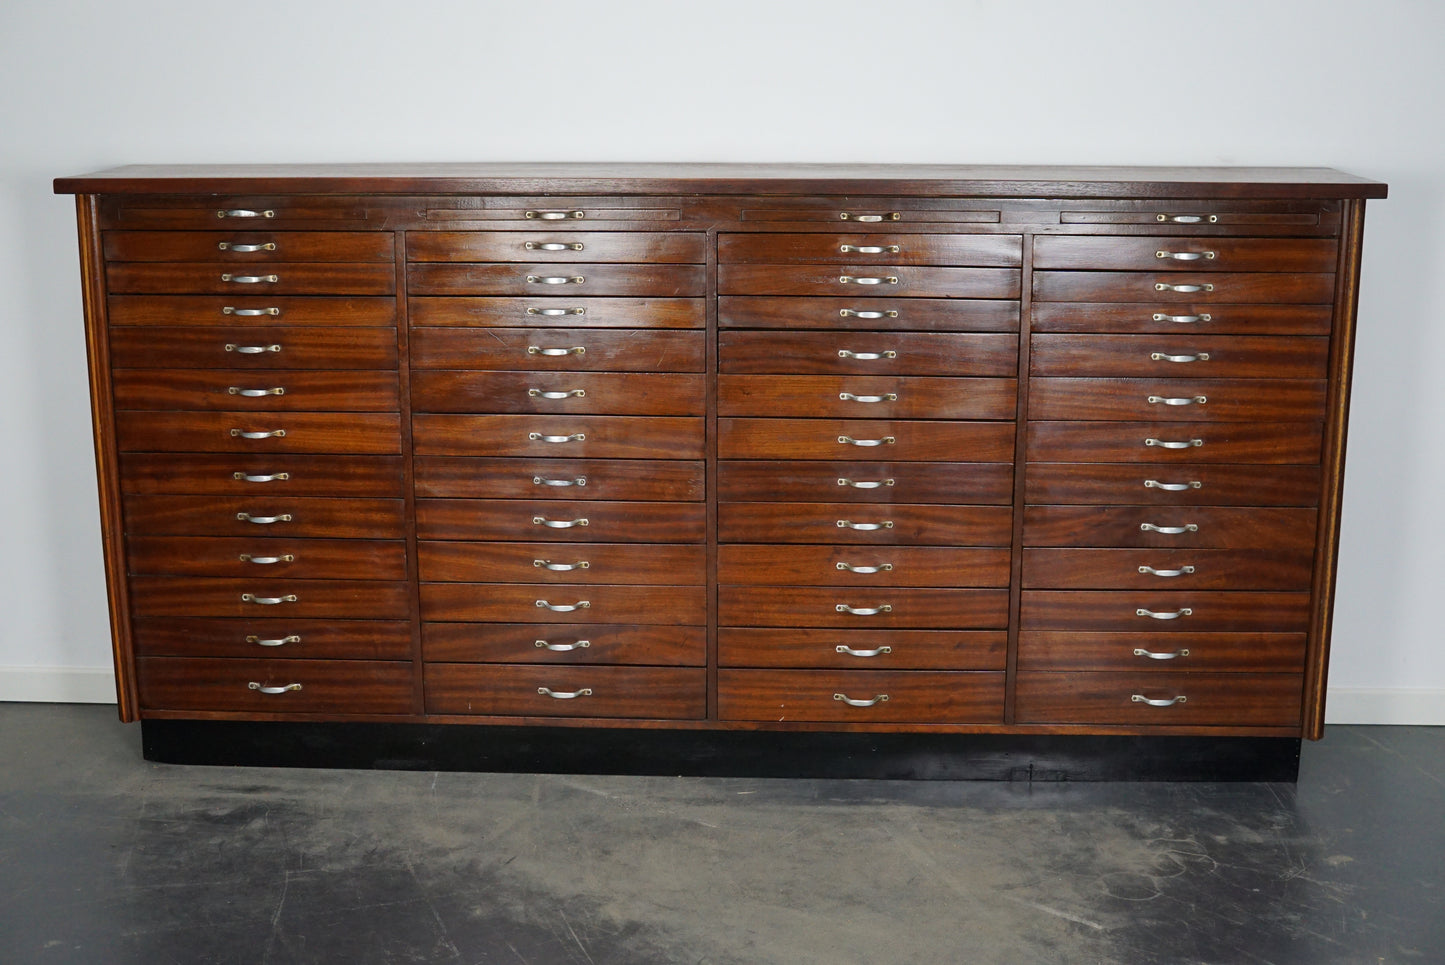 Vintage Large Dutch Mahogany Jewelers / Watchmakers Cabinet, circa 1930